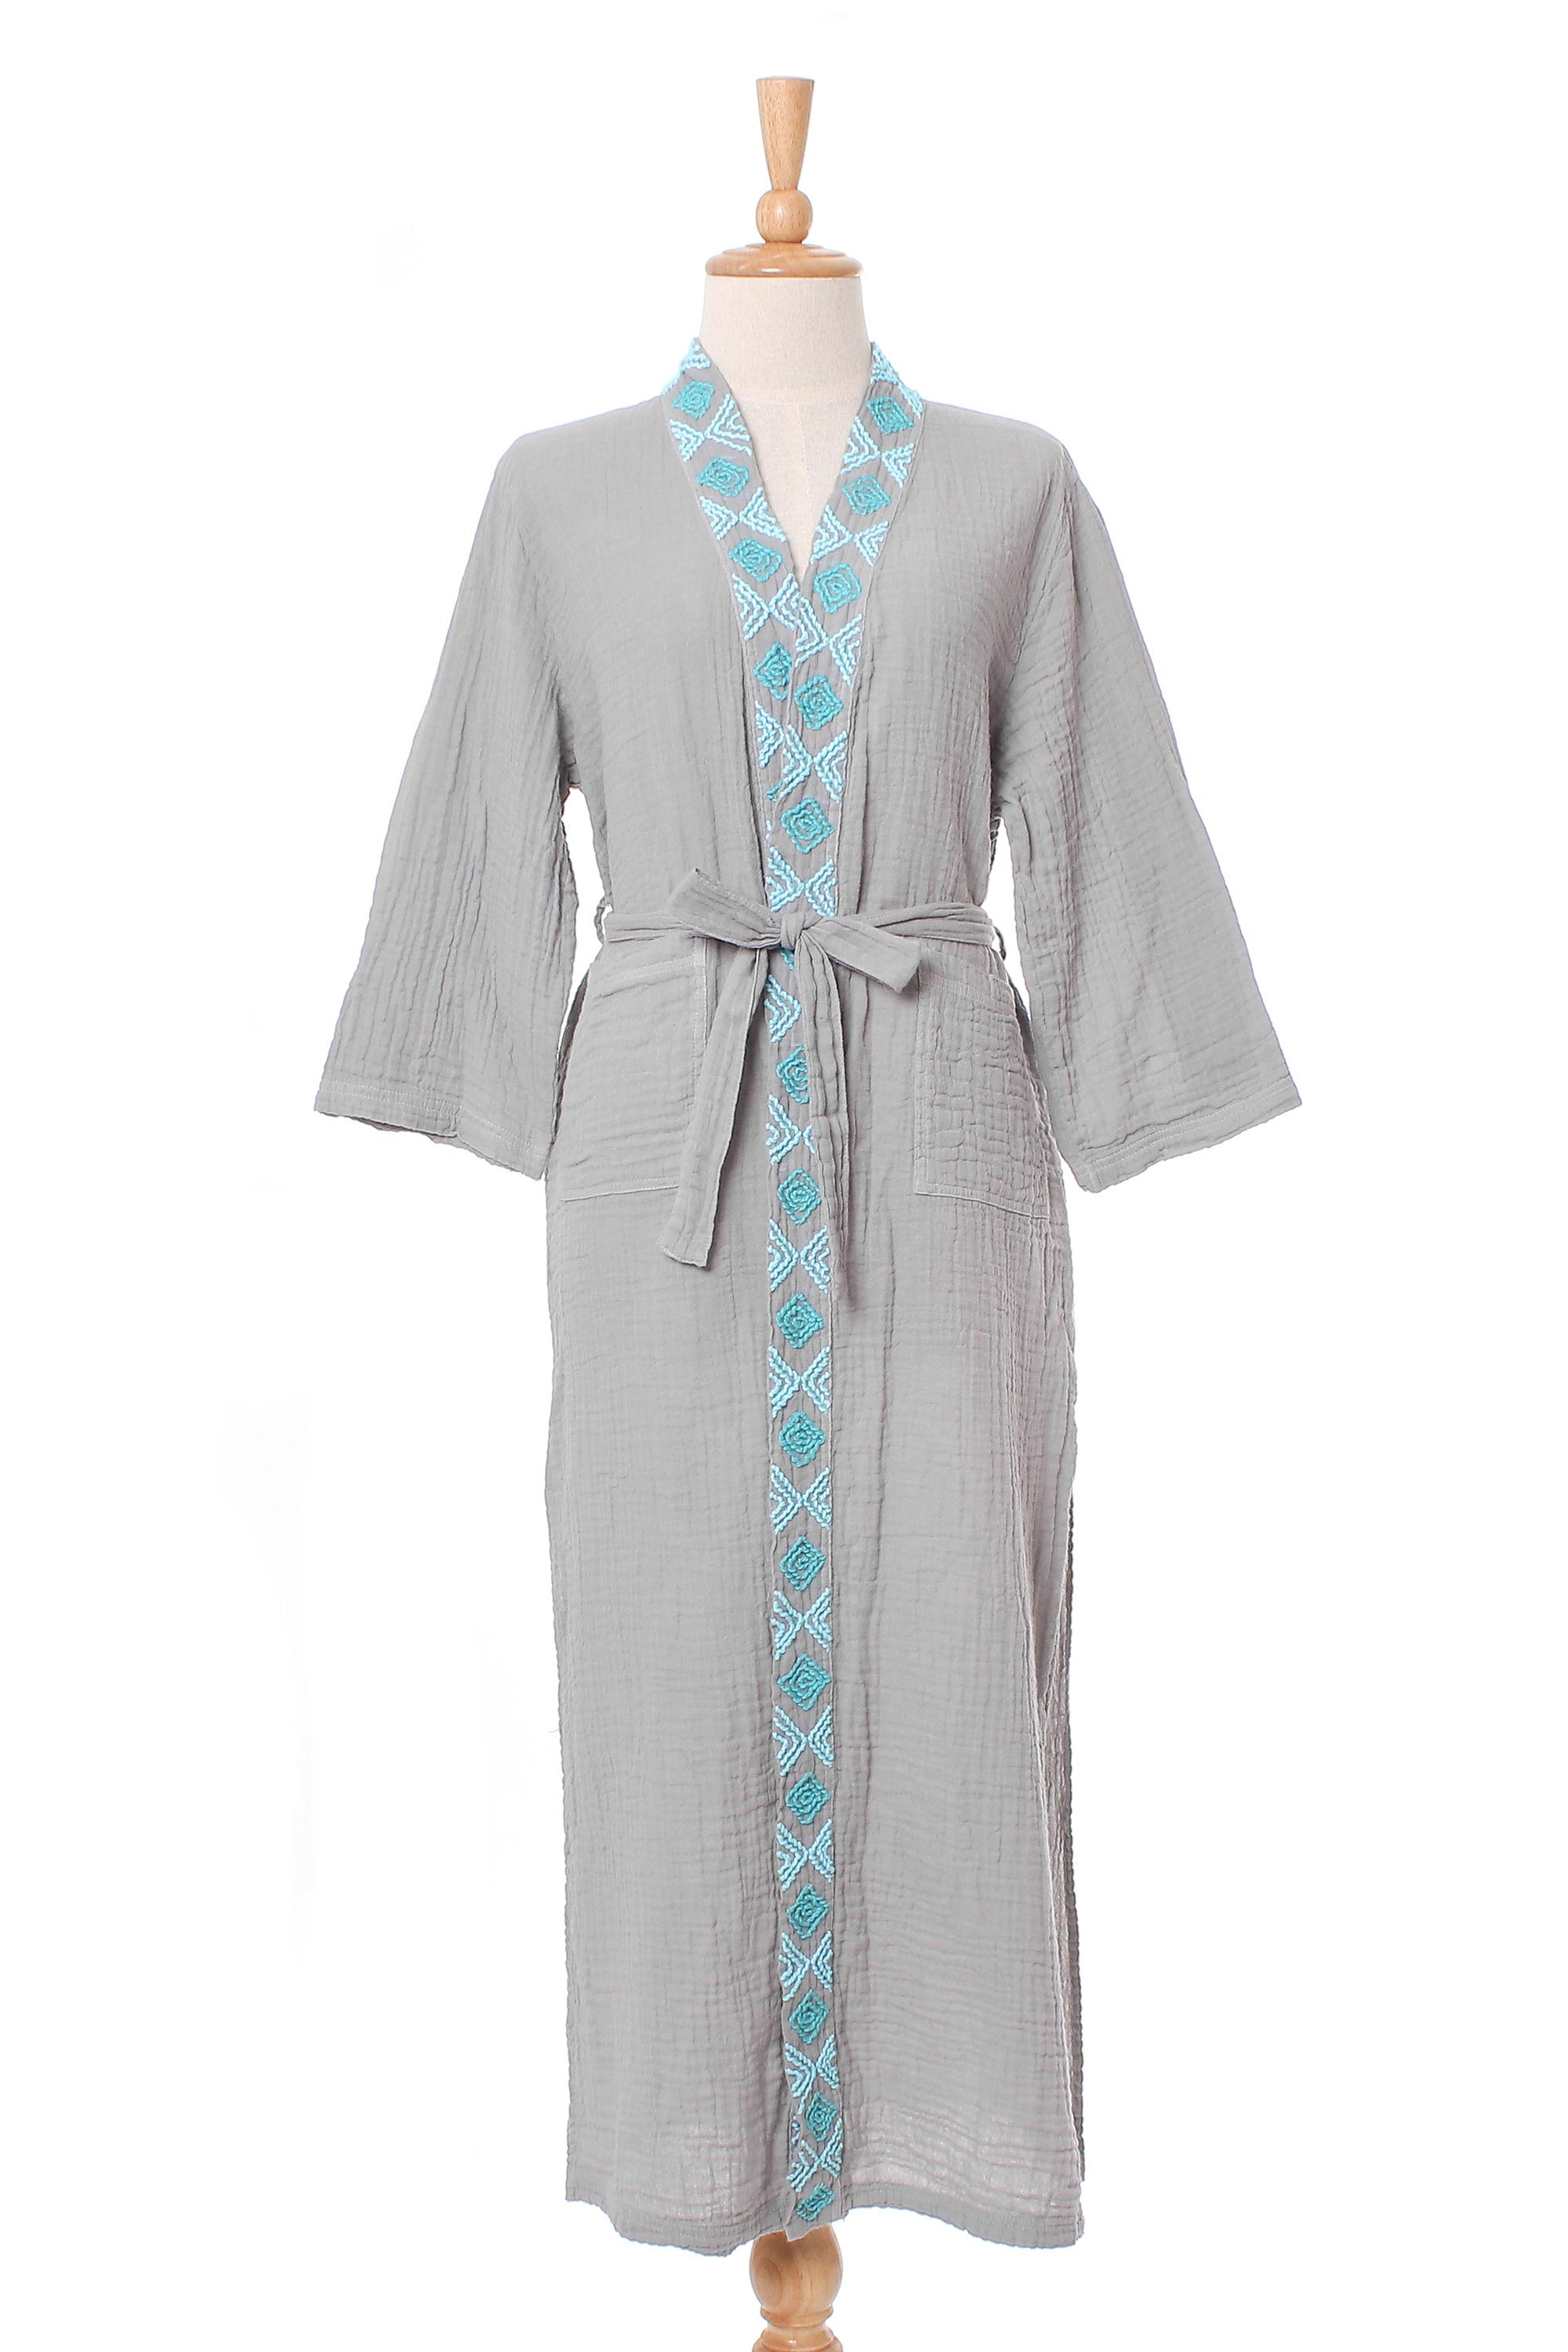 Diamond Embroidered Cotton Robe in Ash from Thailand - Blue Diamonds ...